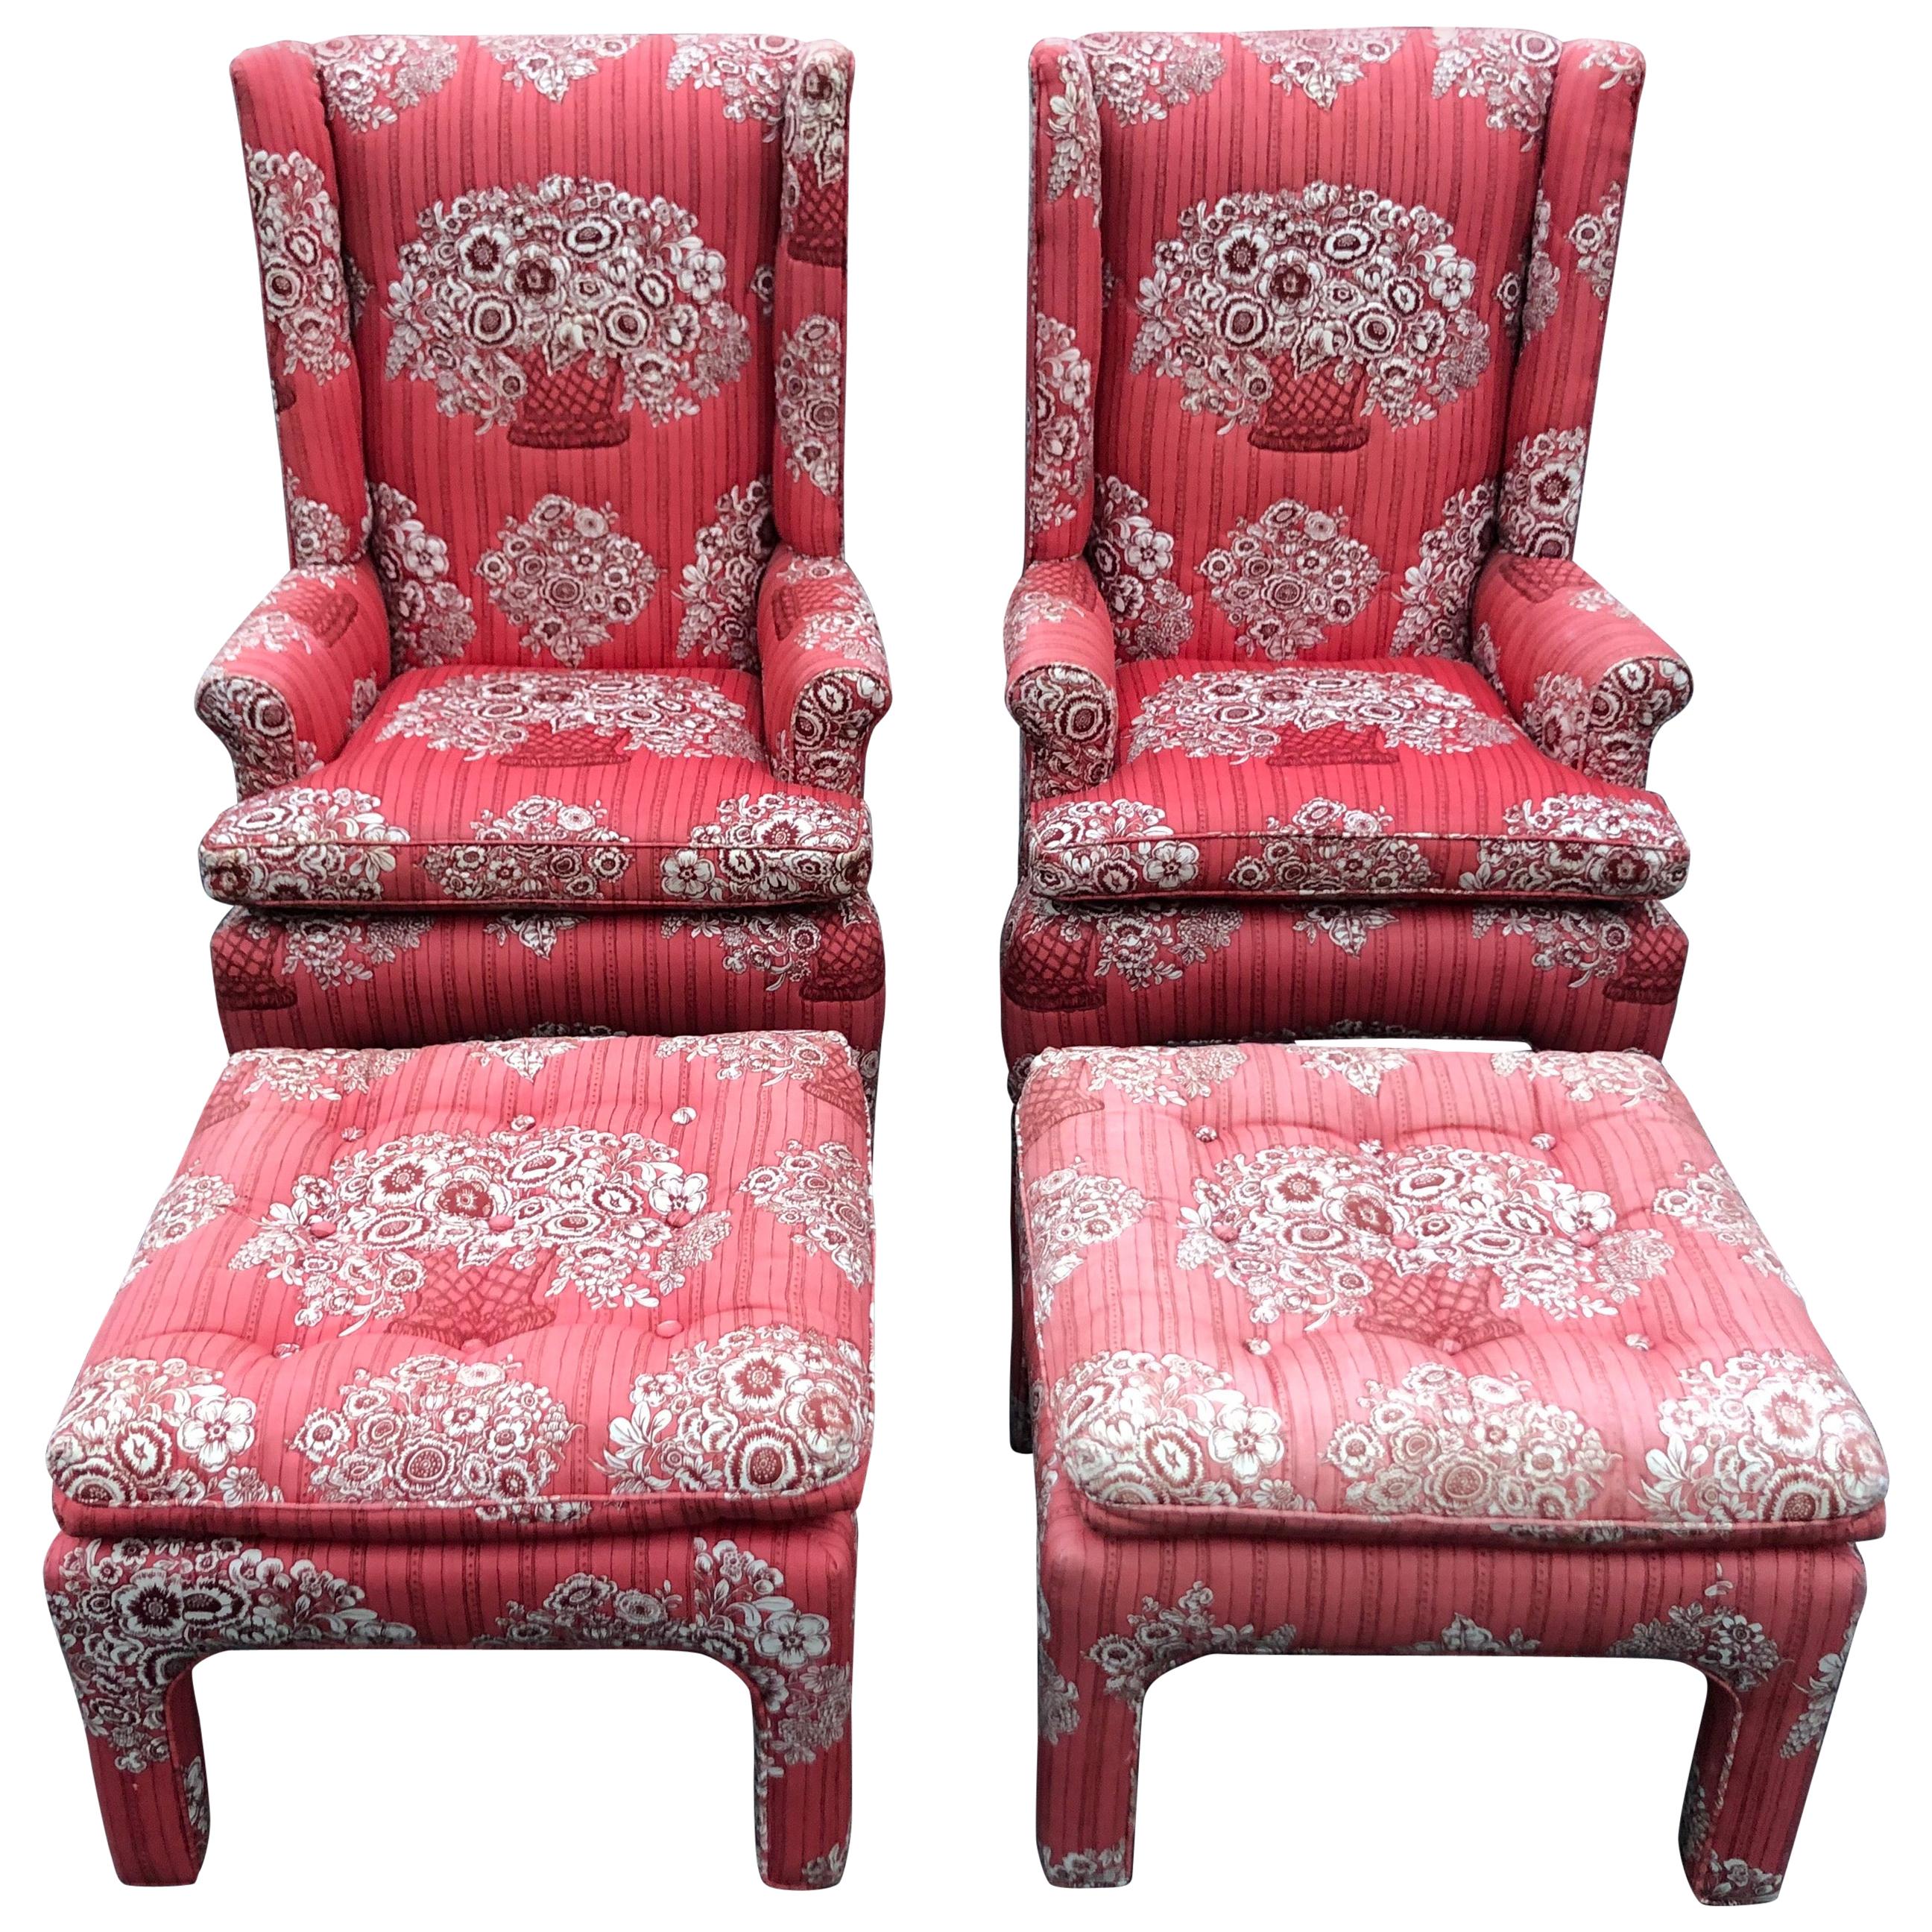 Pair of Petite Wing Back Chairs with Matching Ottomans